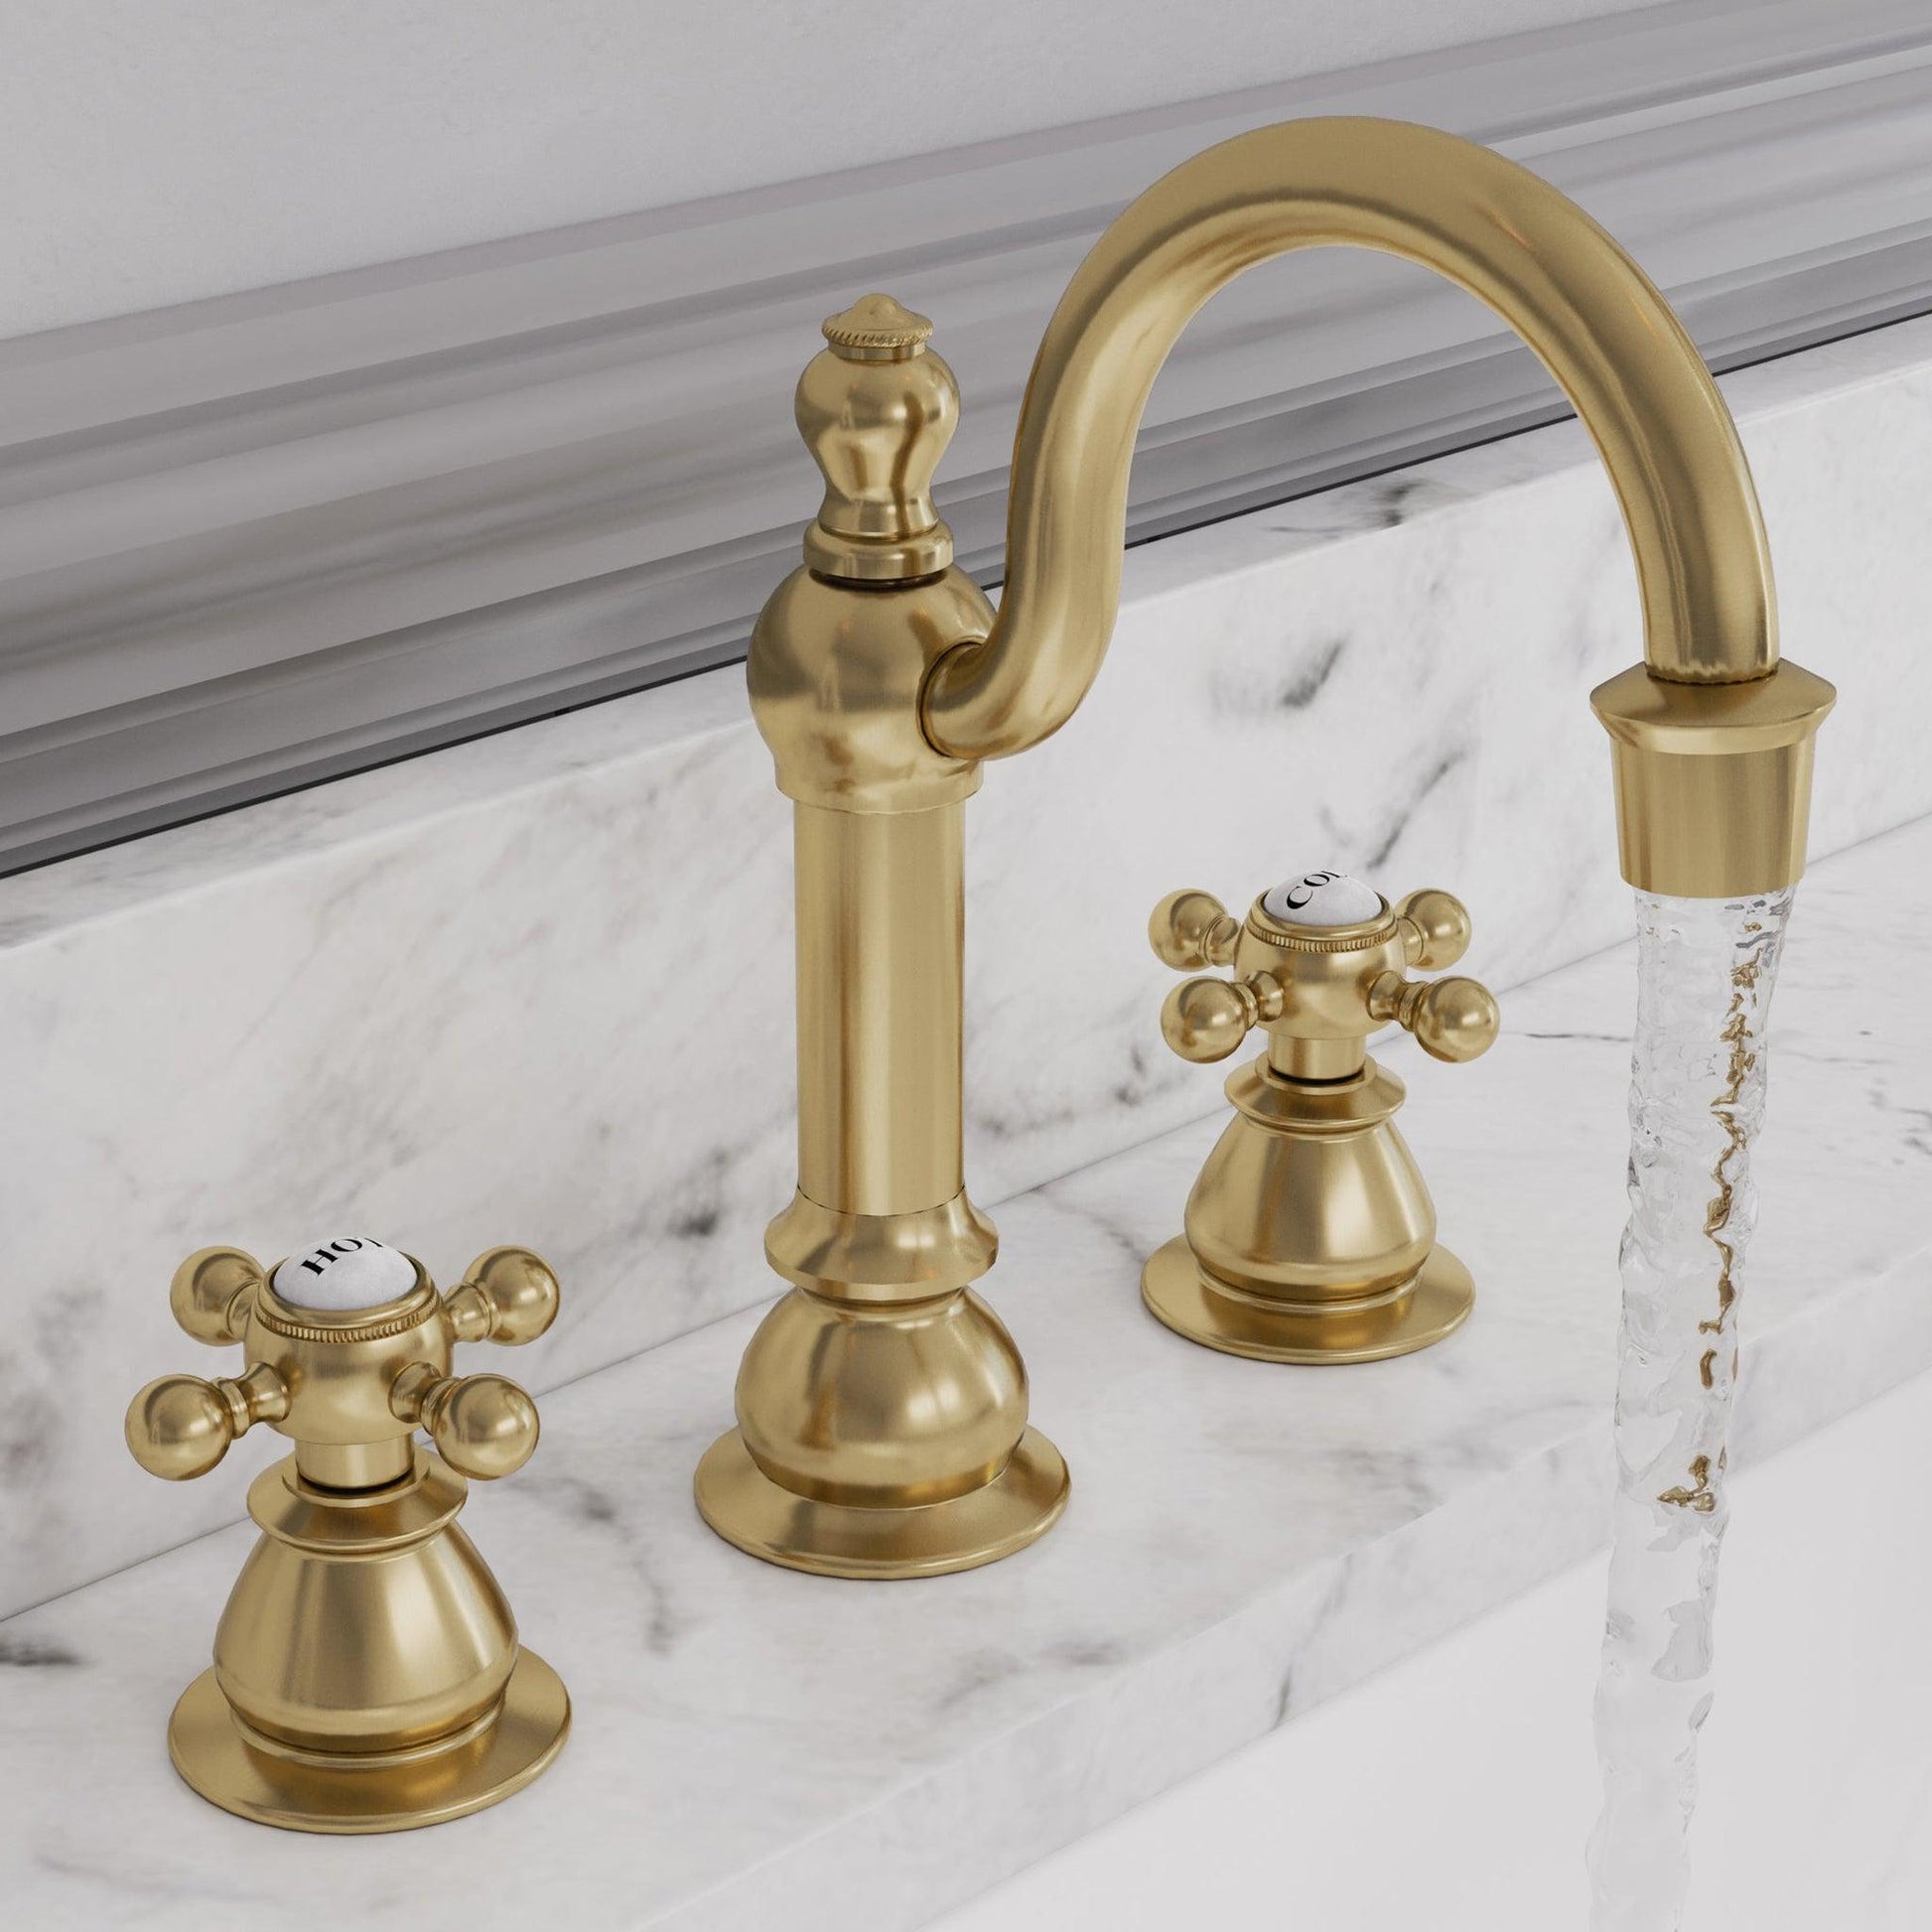 Water Creation American 20th Century Classic Widespread Lavatory F2-0012 8" Gold Solid Brass Faucet With Pop-Up Drain And Metal Lever Handles, Hot And Cold Labels Included